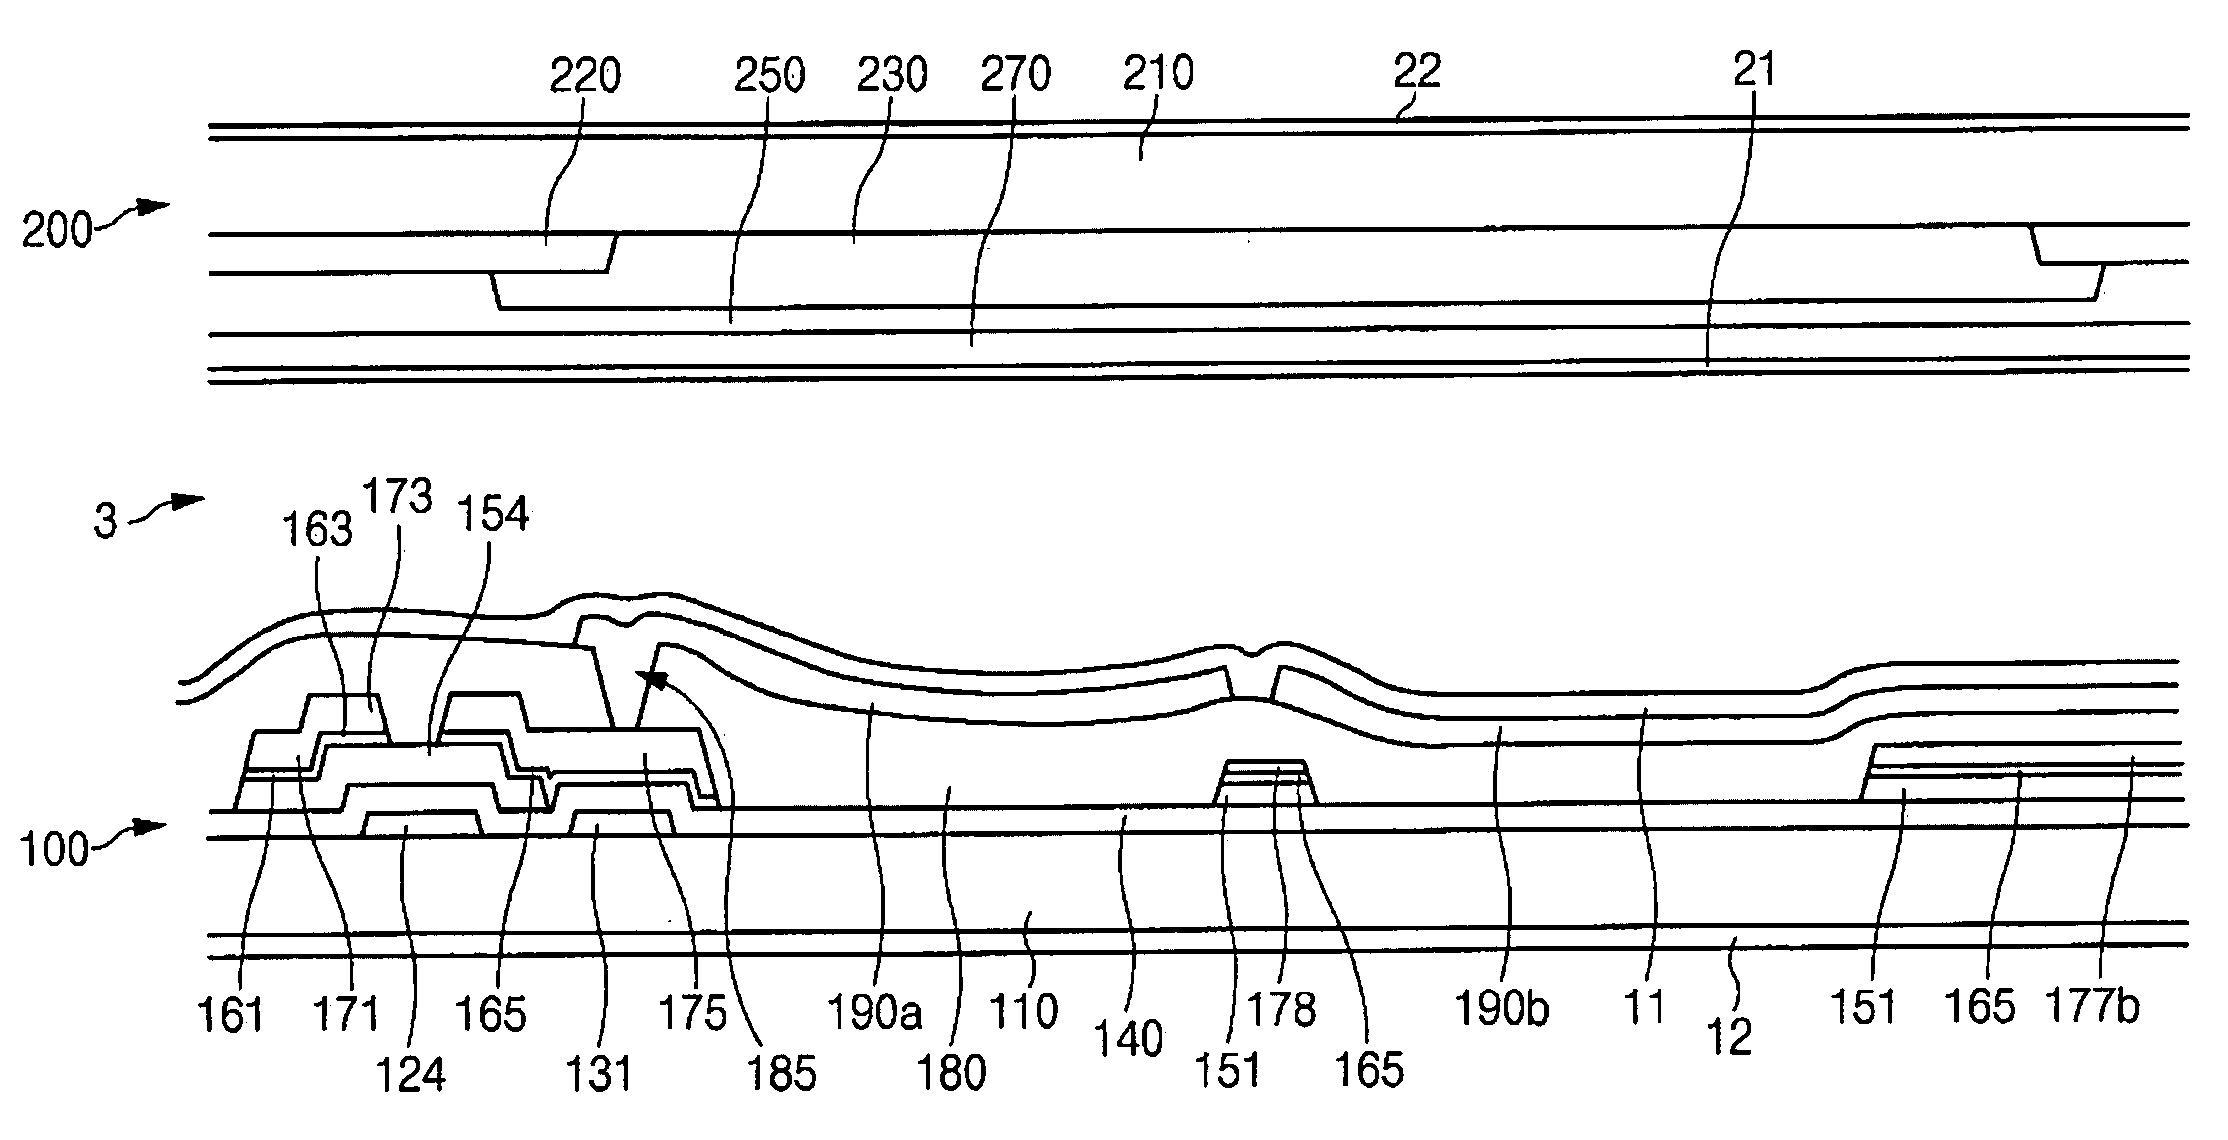 Liquid crystal display and thin film transistor array panel therefor